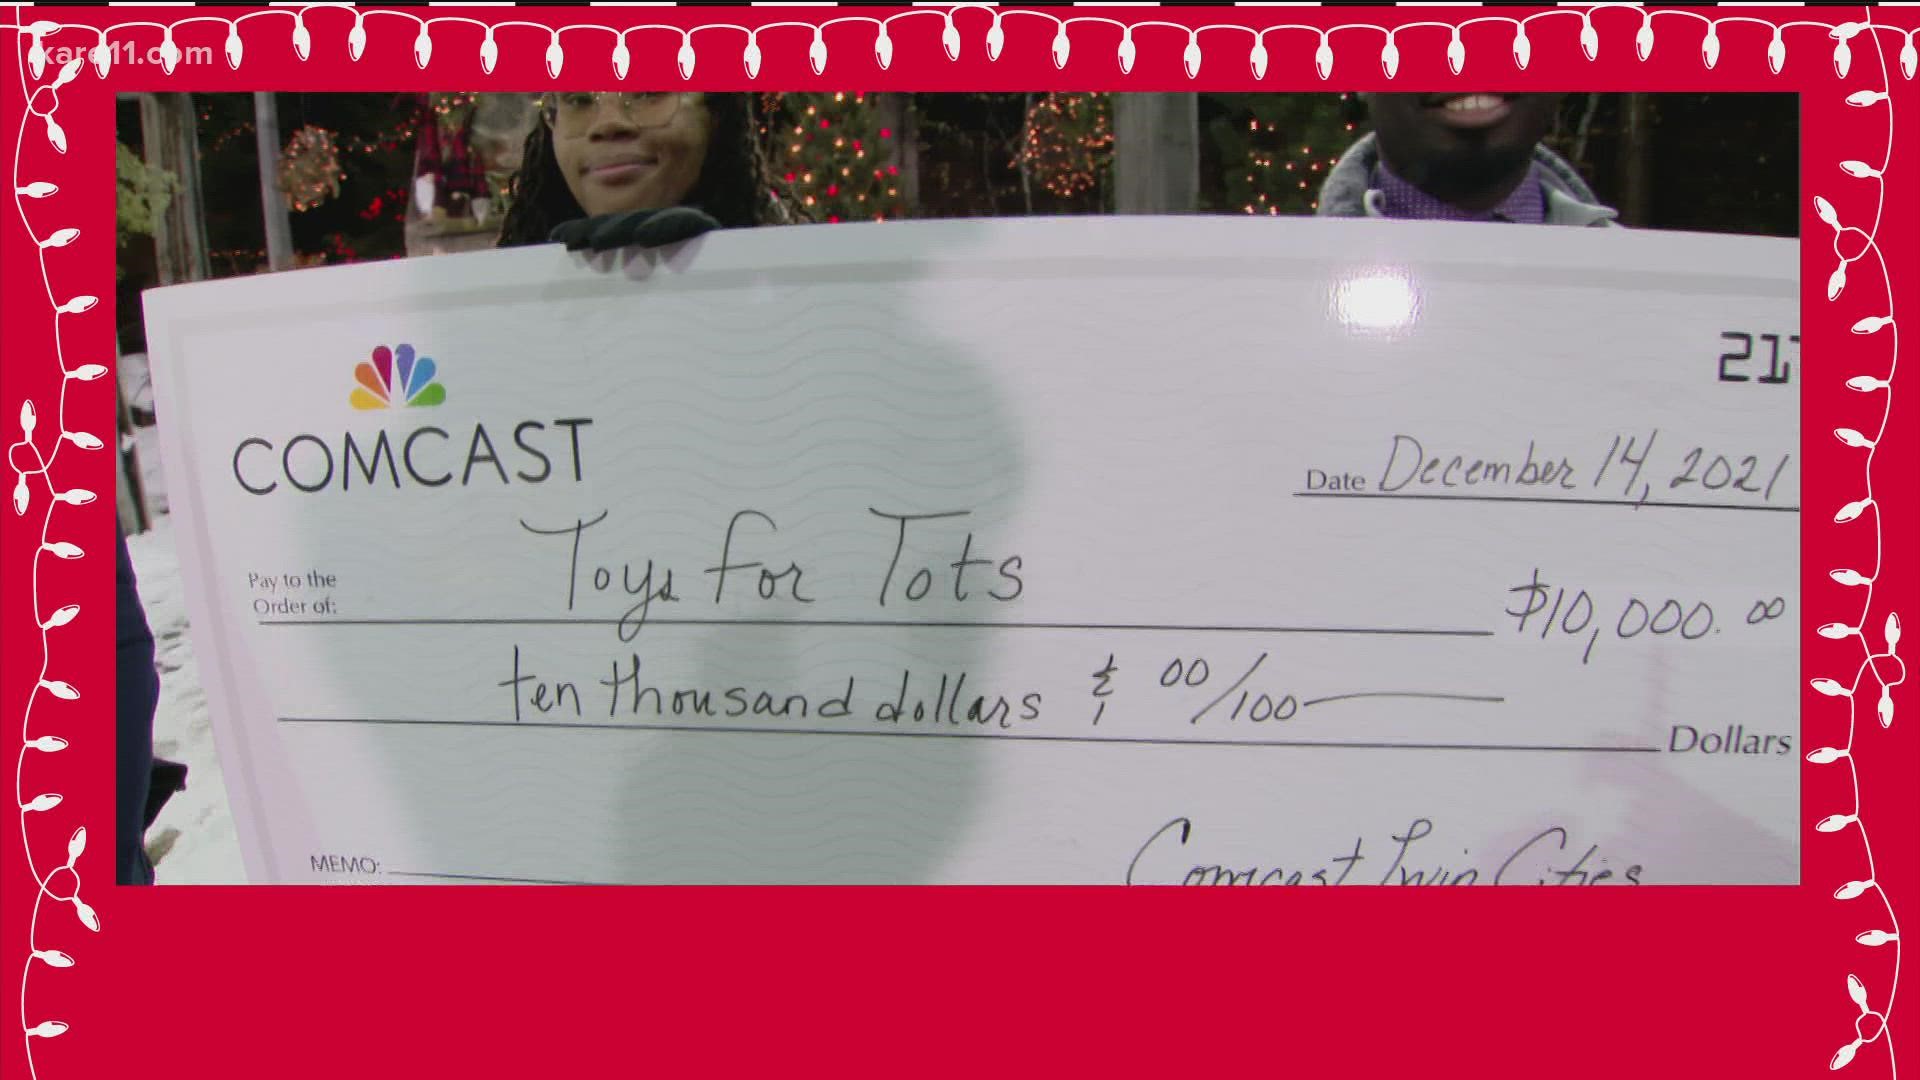 Thanks to everyone who's donating to the Toys for Tots campaign in 2021! 

Find out more about how you can help at http://www.kare11.com/toysfortots.